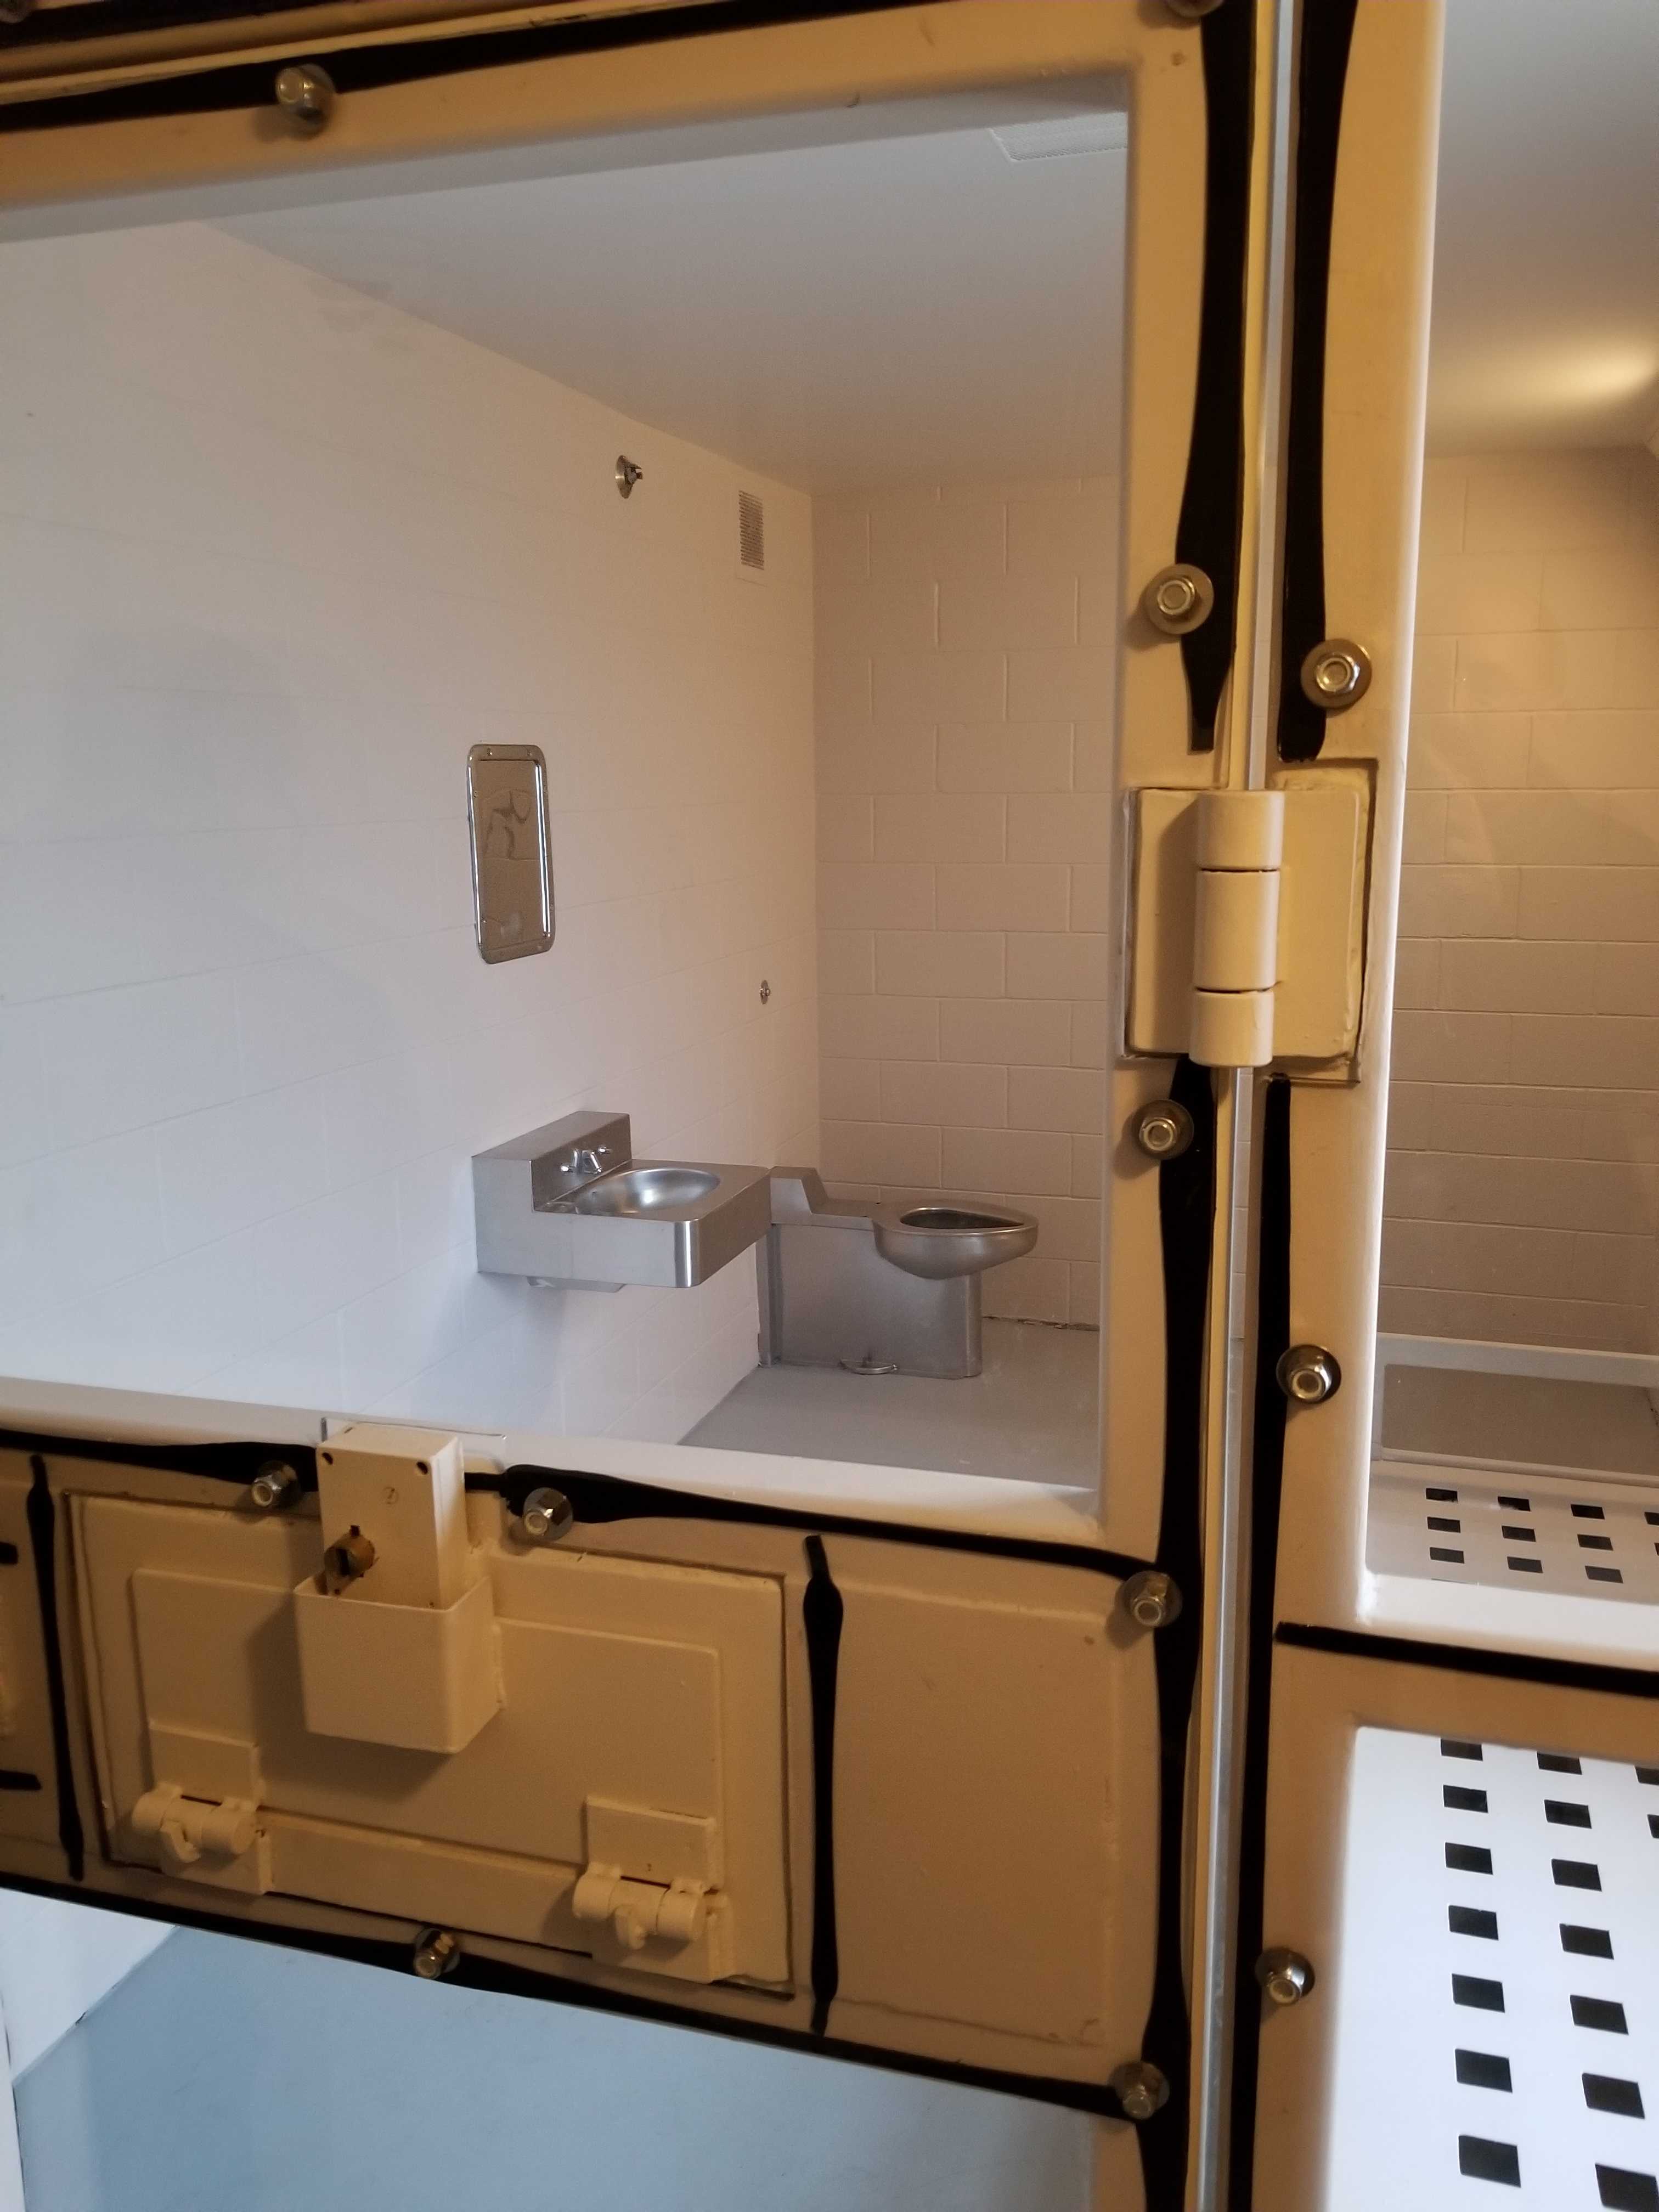 Photo of an observation cell next to the Structured Intervention Units at Nova Institution.